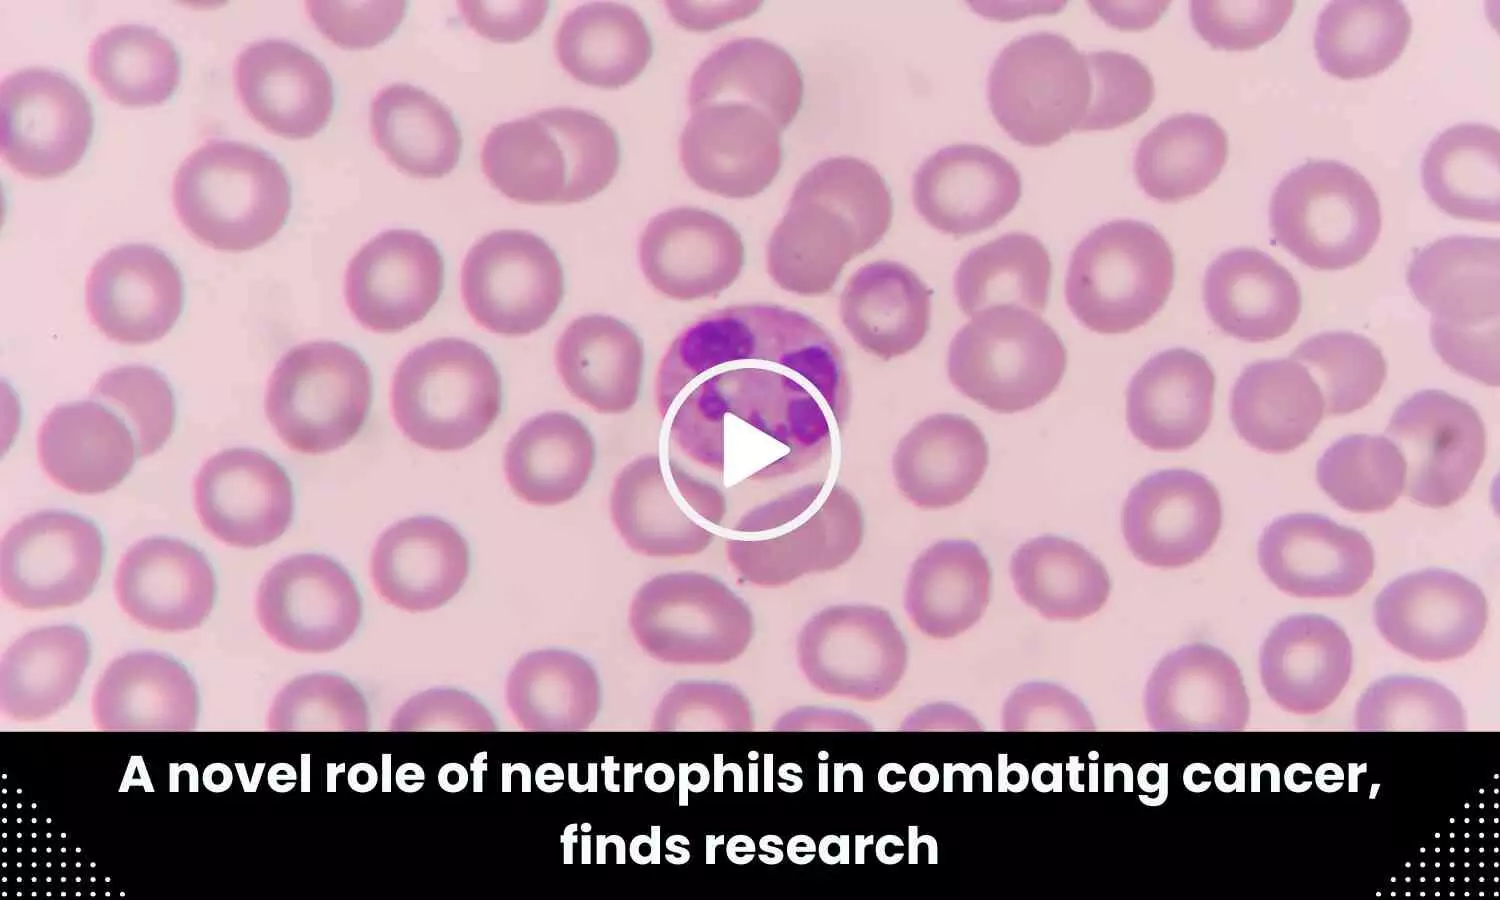 A novel role of neutrophils in combating cancer, finds research